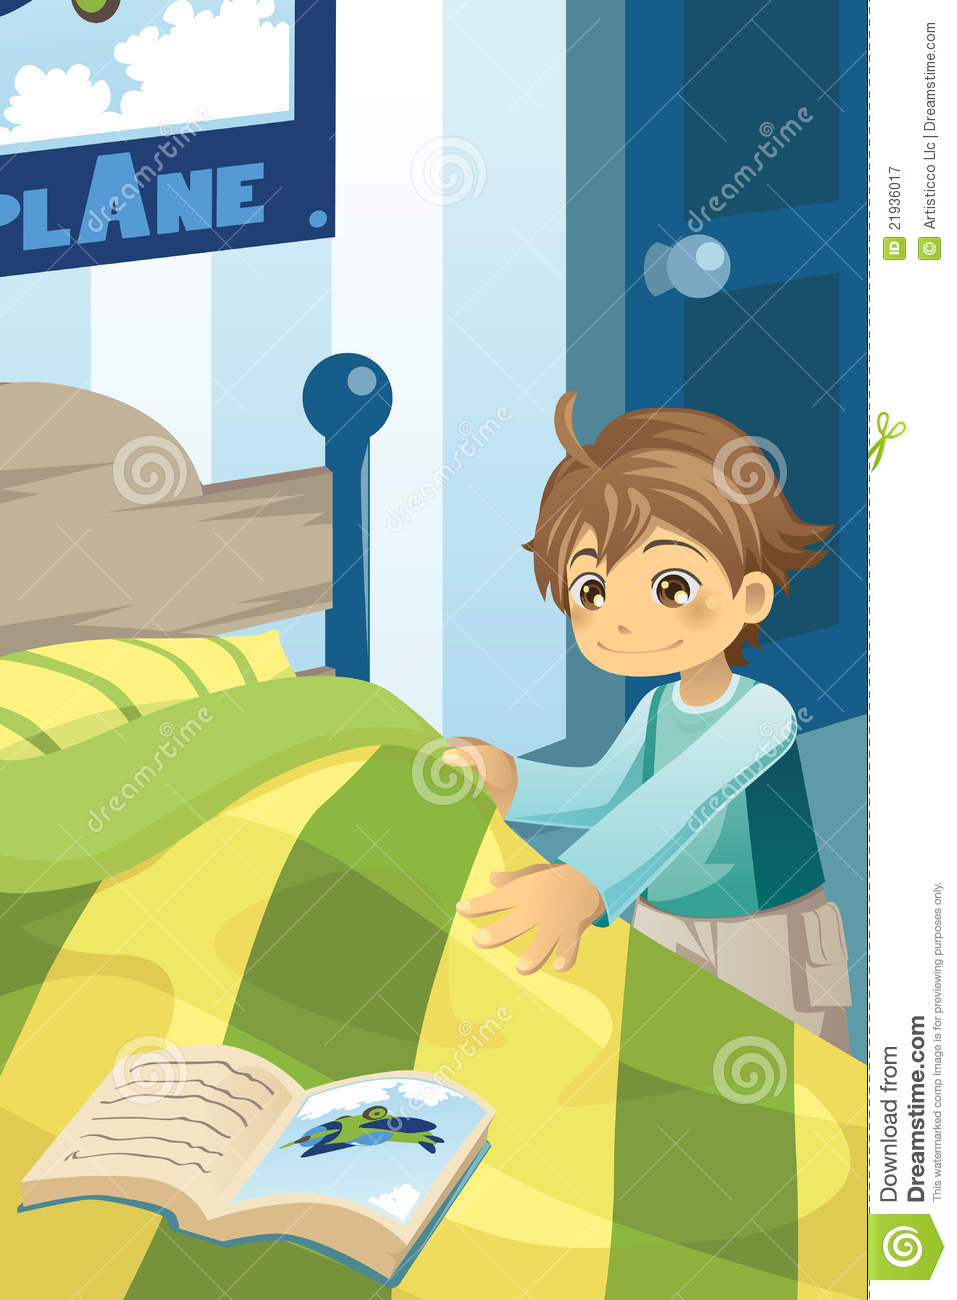 Boy Making His Bed Royalty Free Stock Photography   Image  21936017